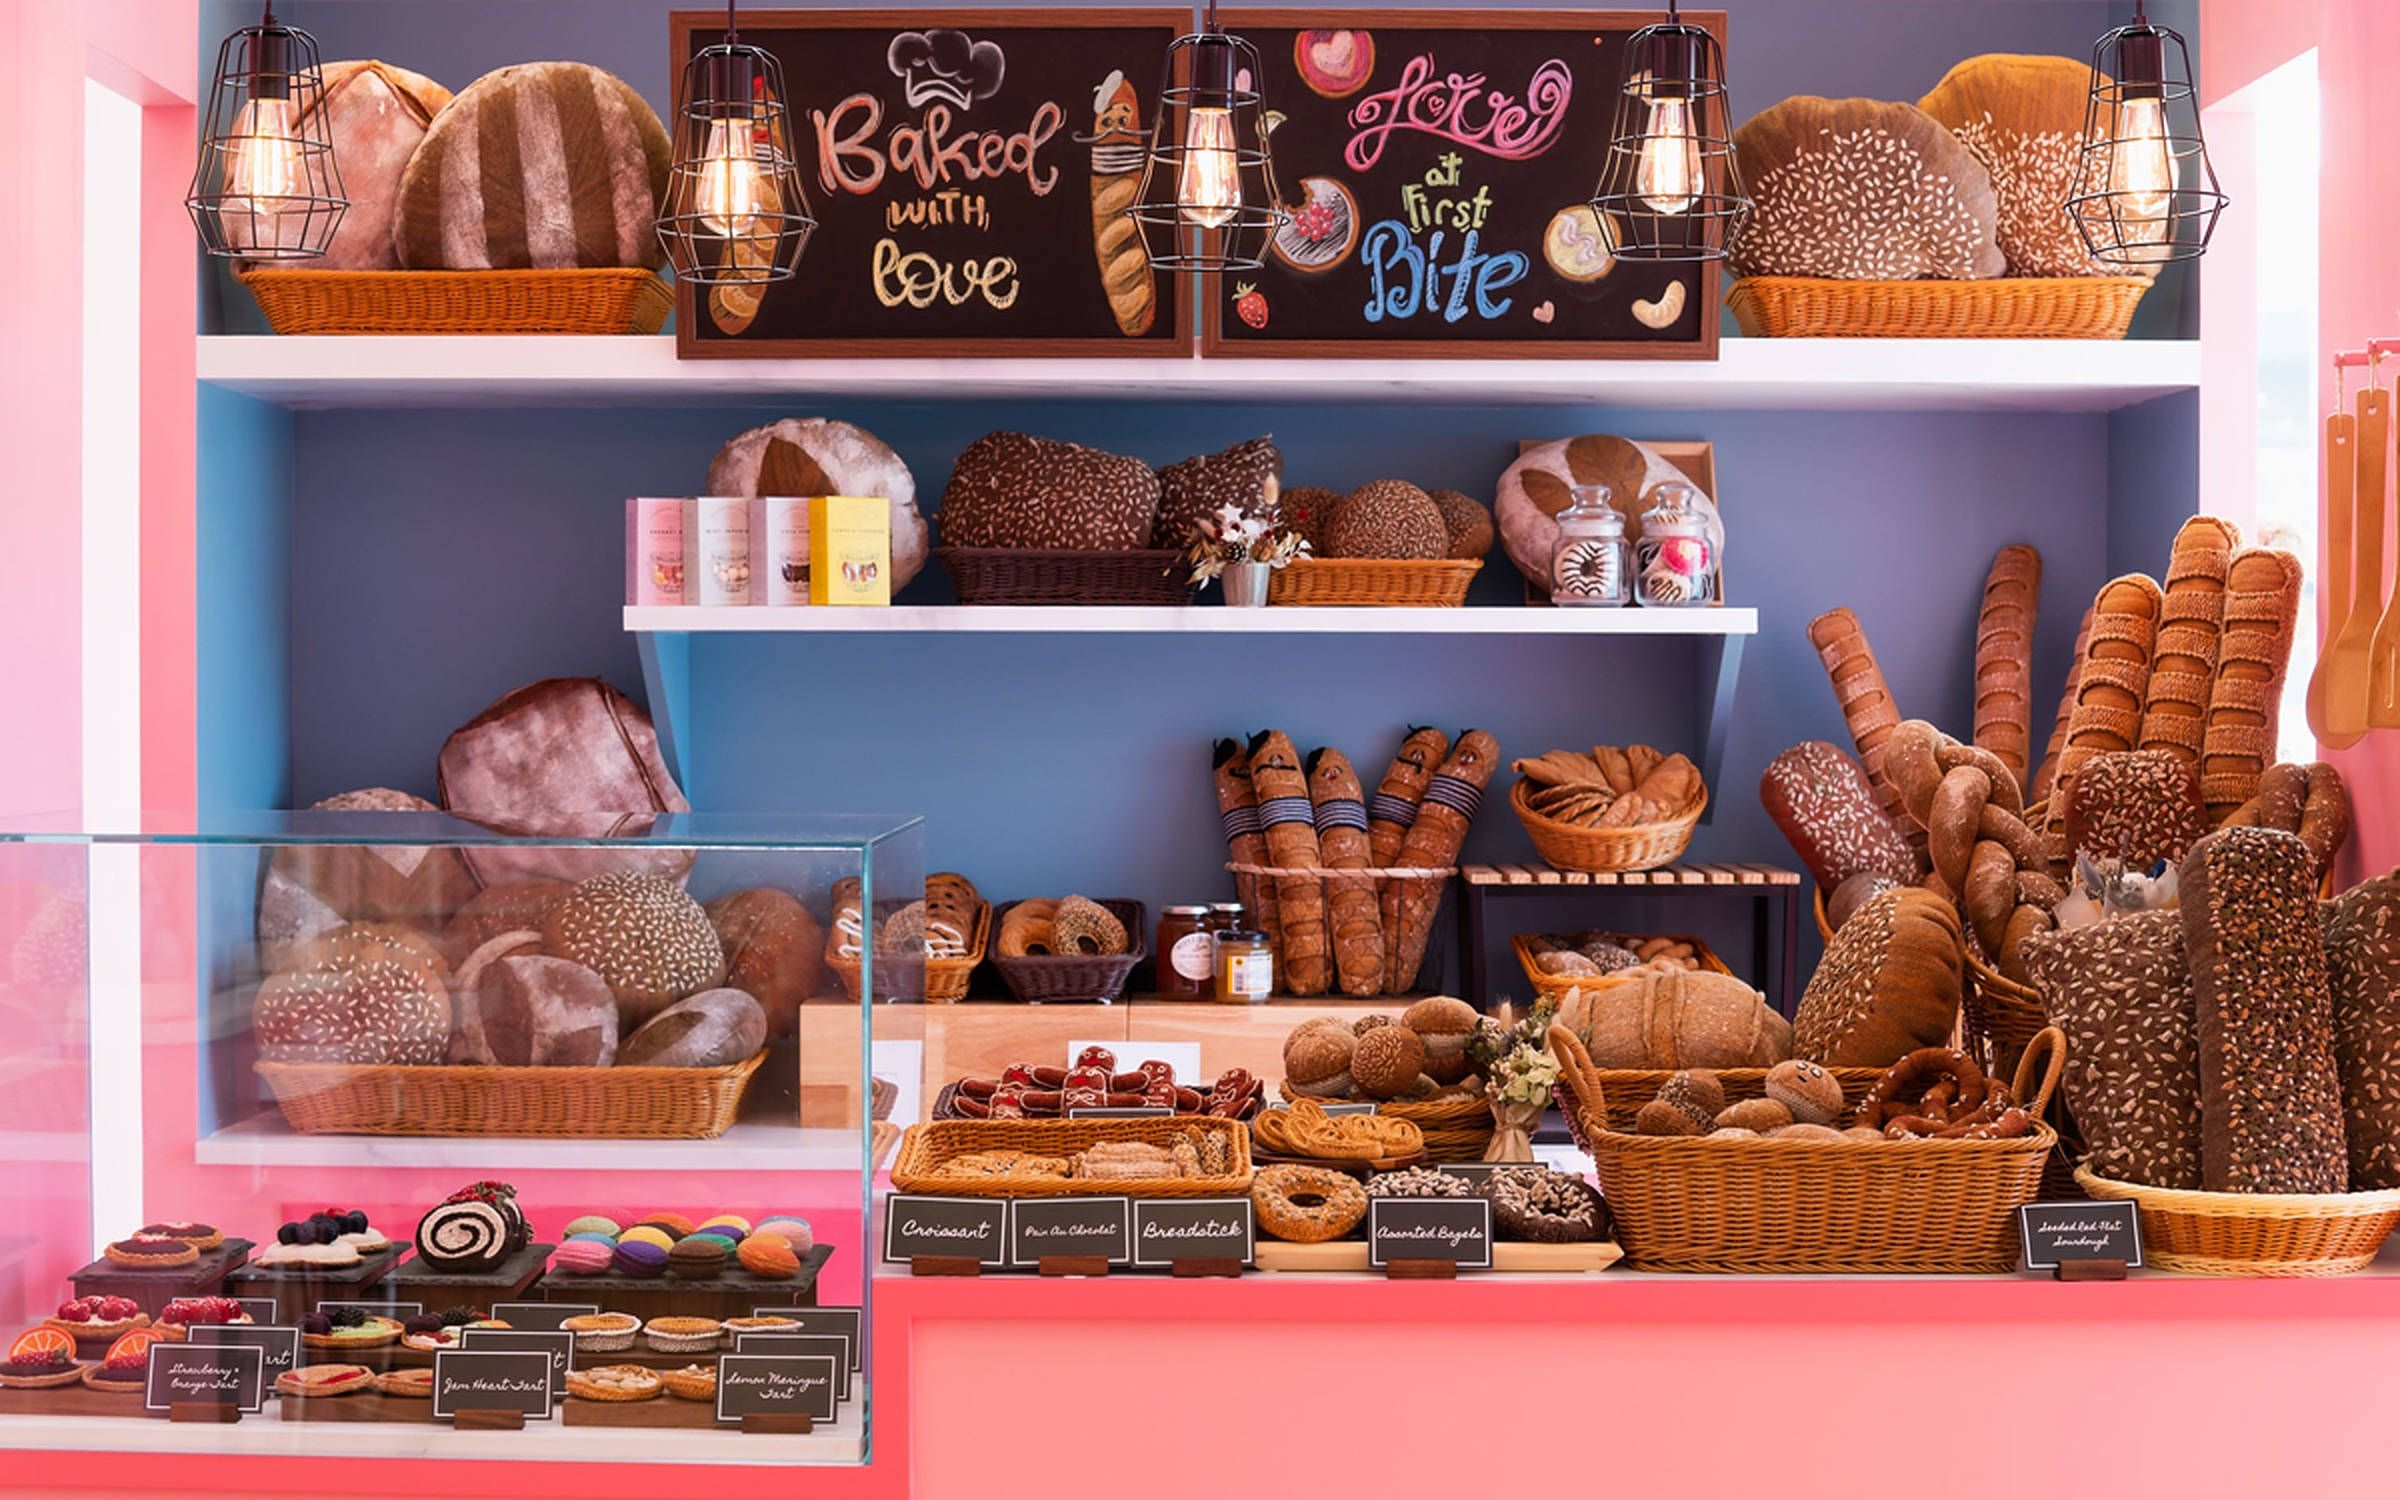 A display of baked goods in an open store - Bakery